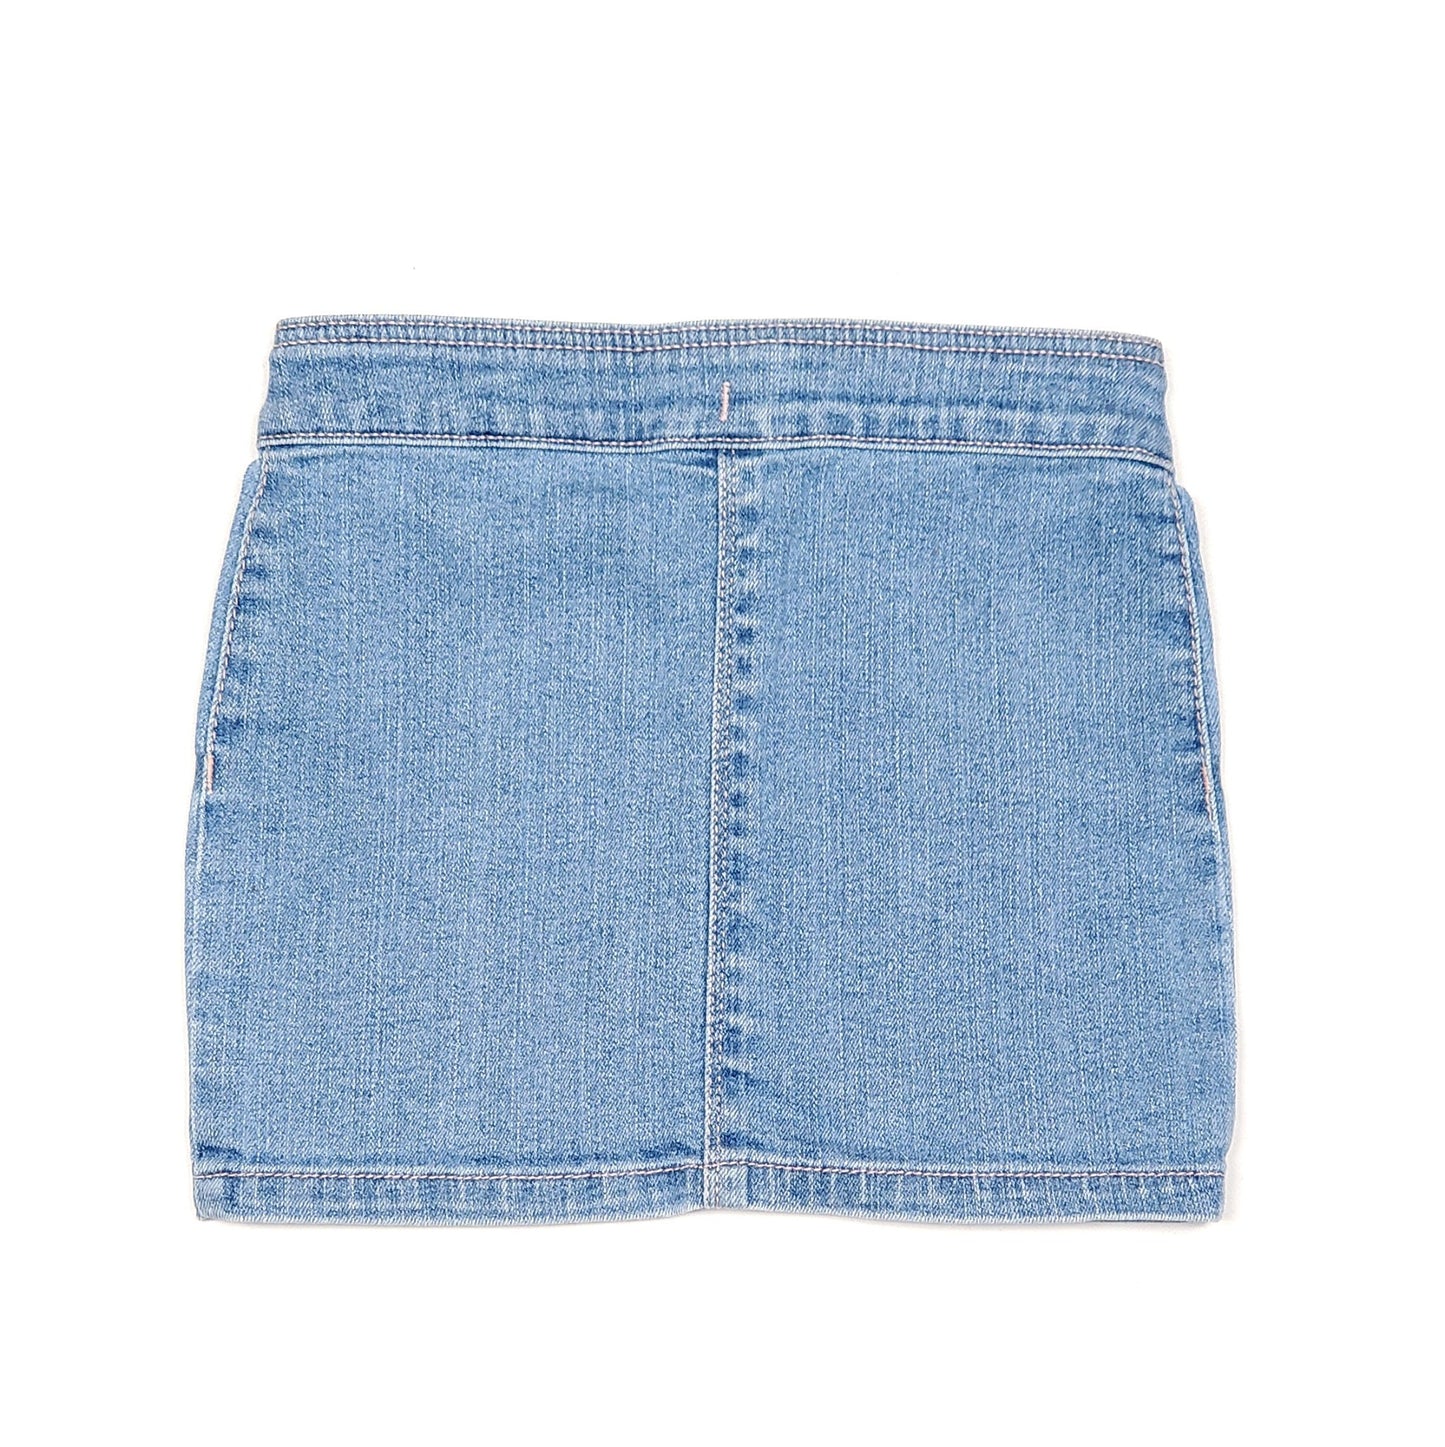 Carters Button Front Denim Girls Skirt 3T Used, back